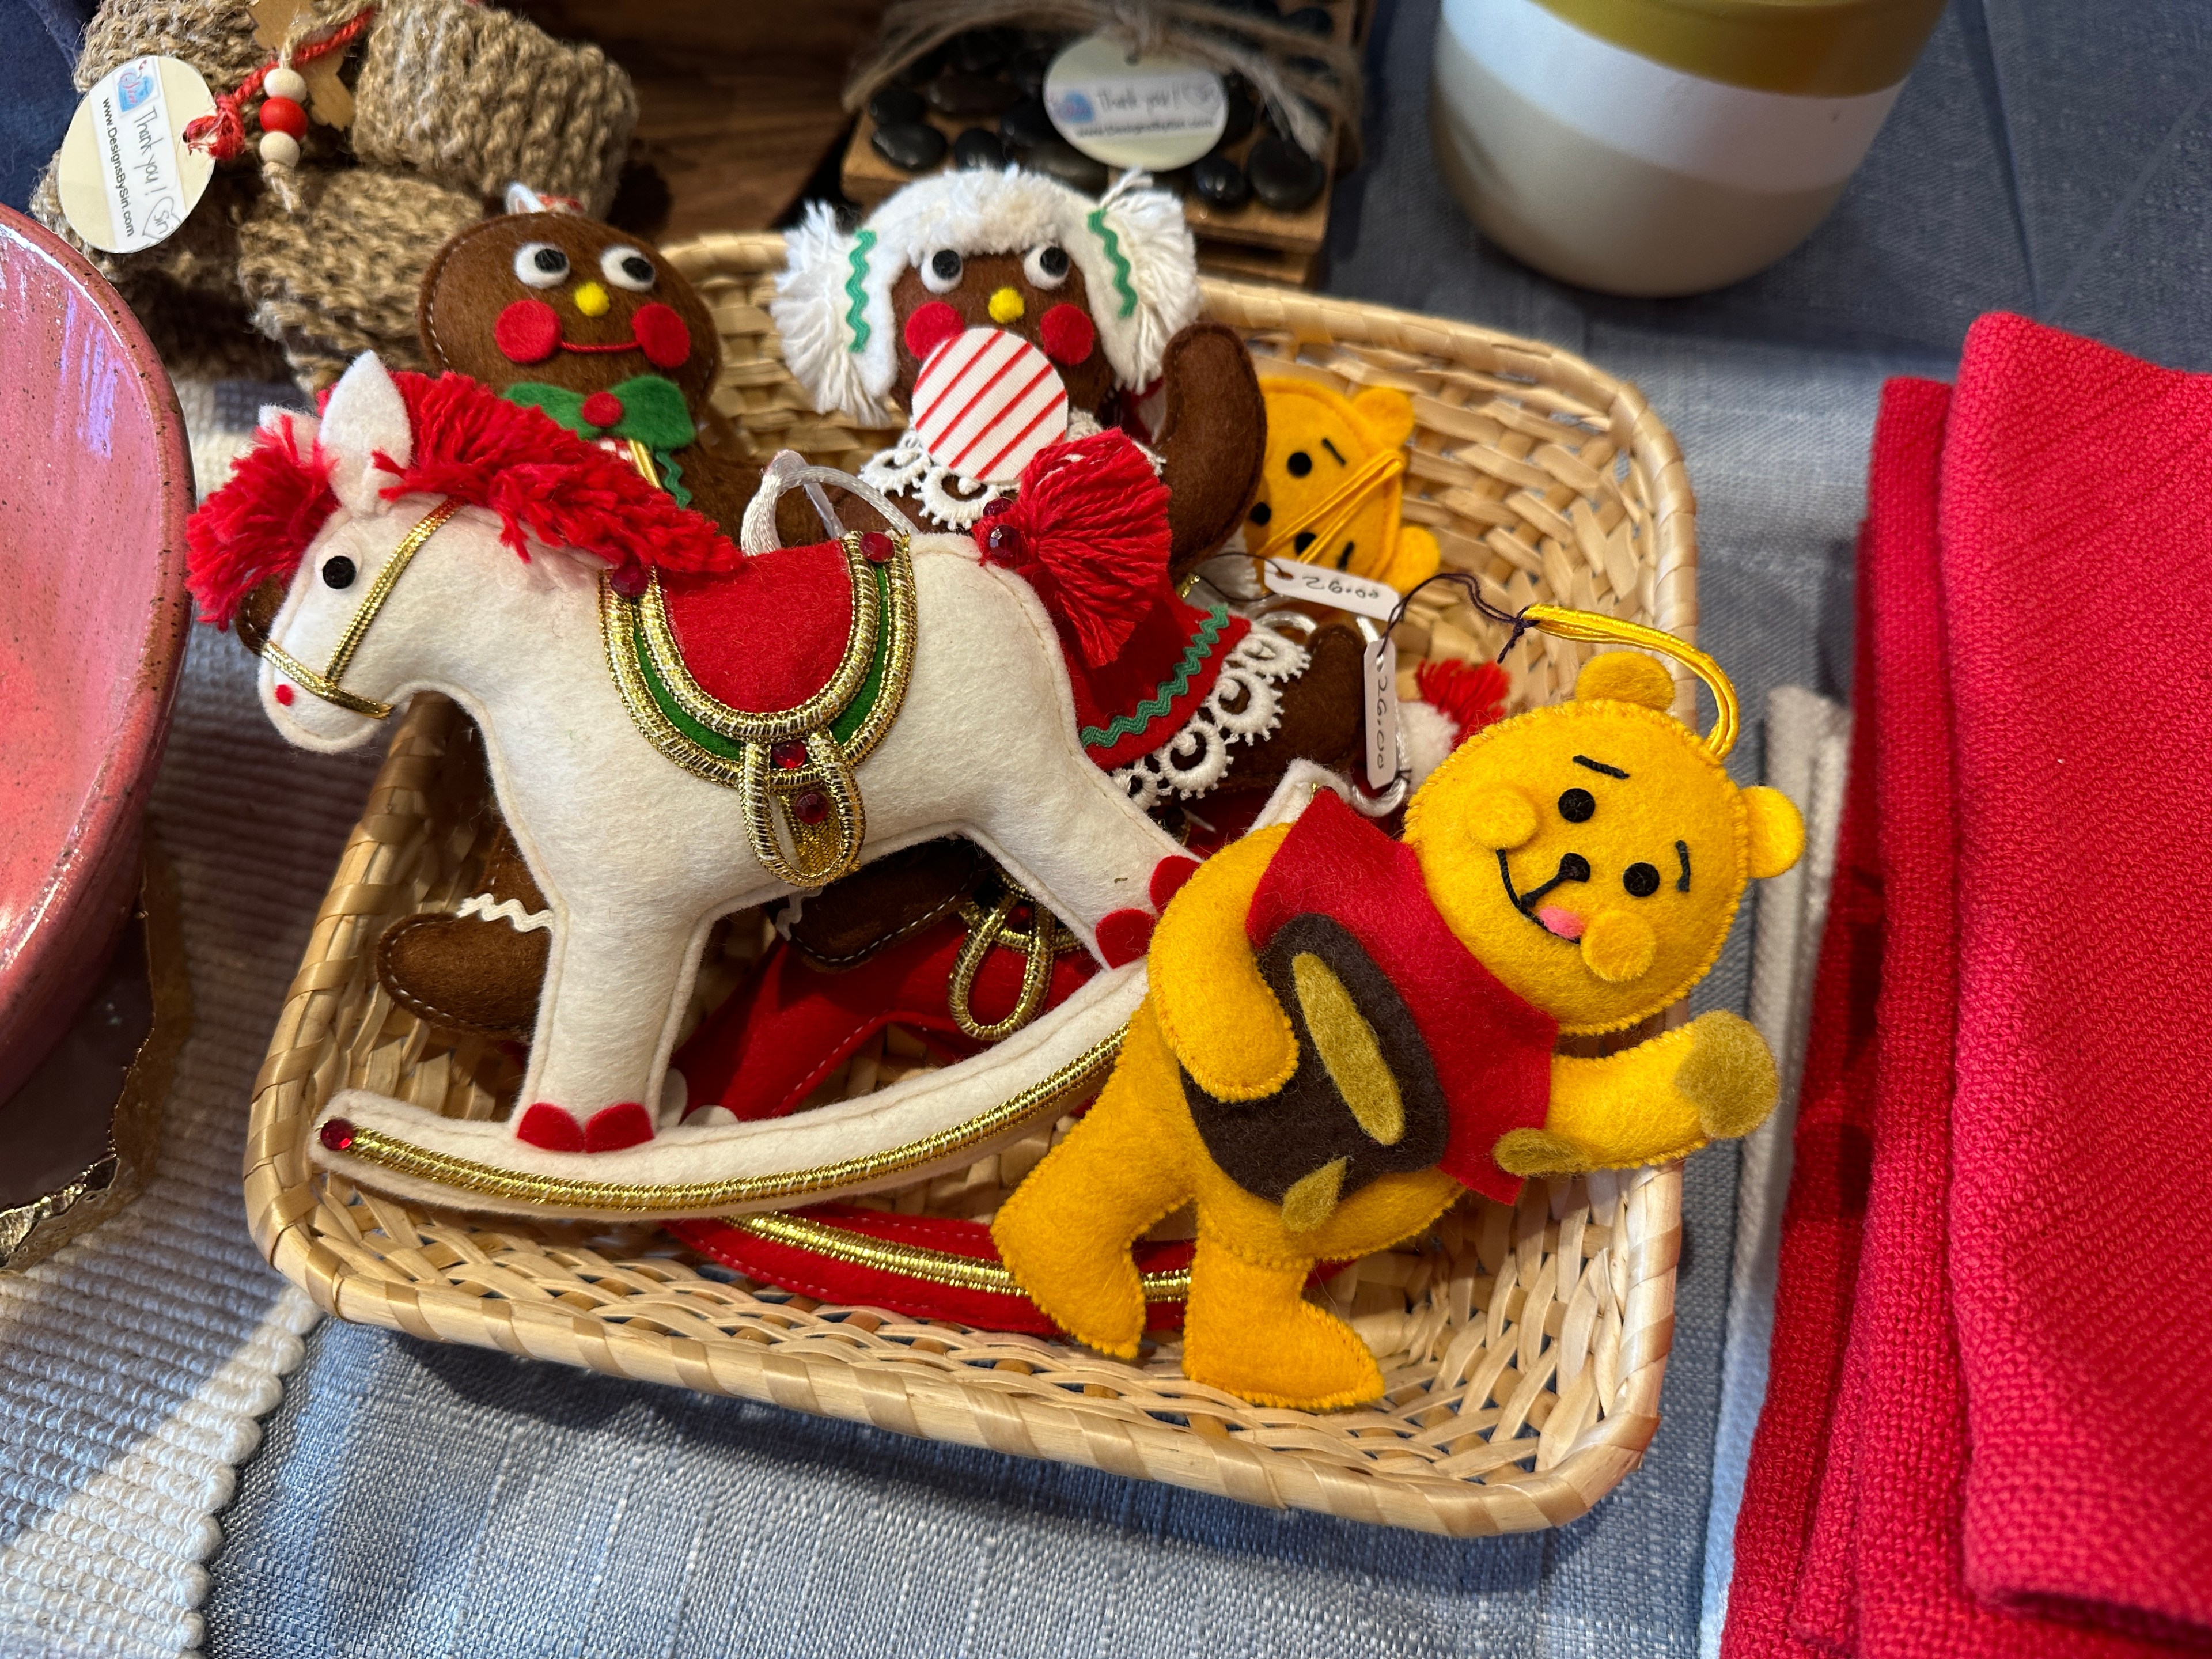 Vintage hand-sewn ornaments, including a rocking horse and Winnie the Pooh bear sit in a basket. 